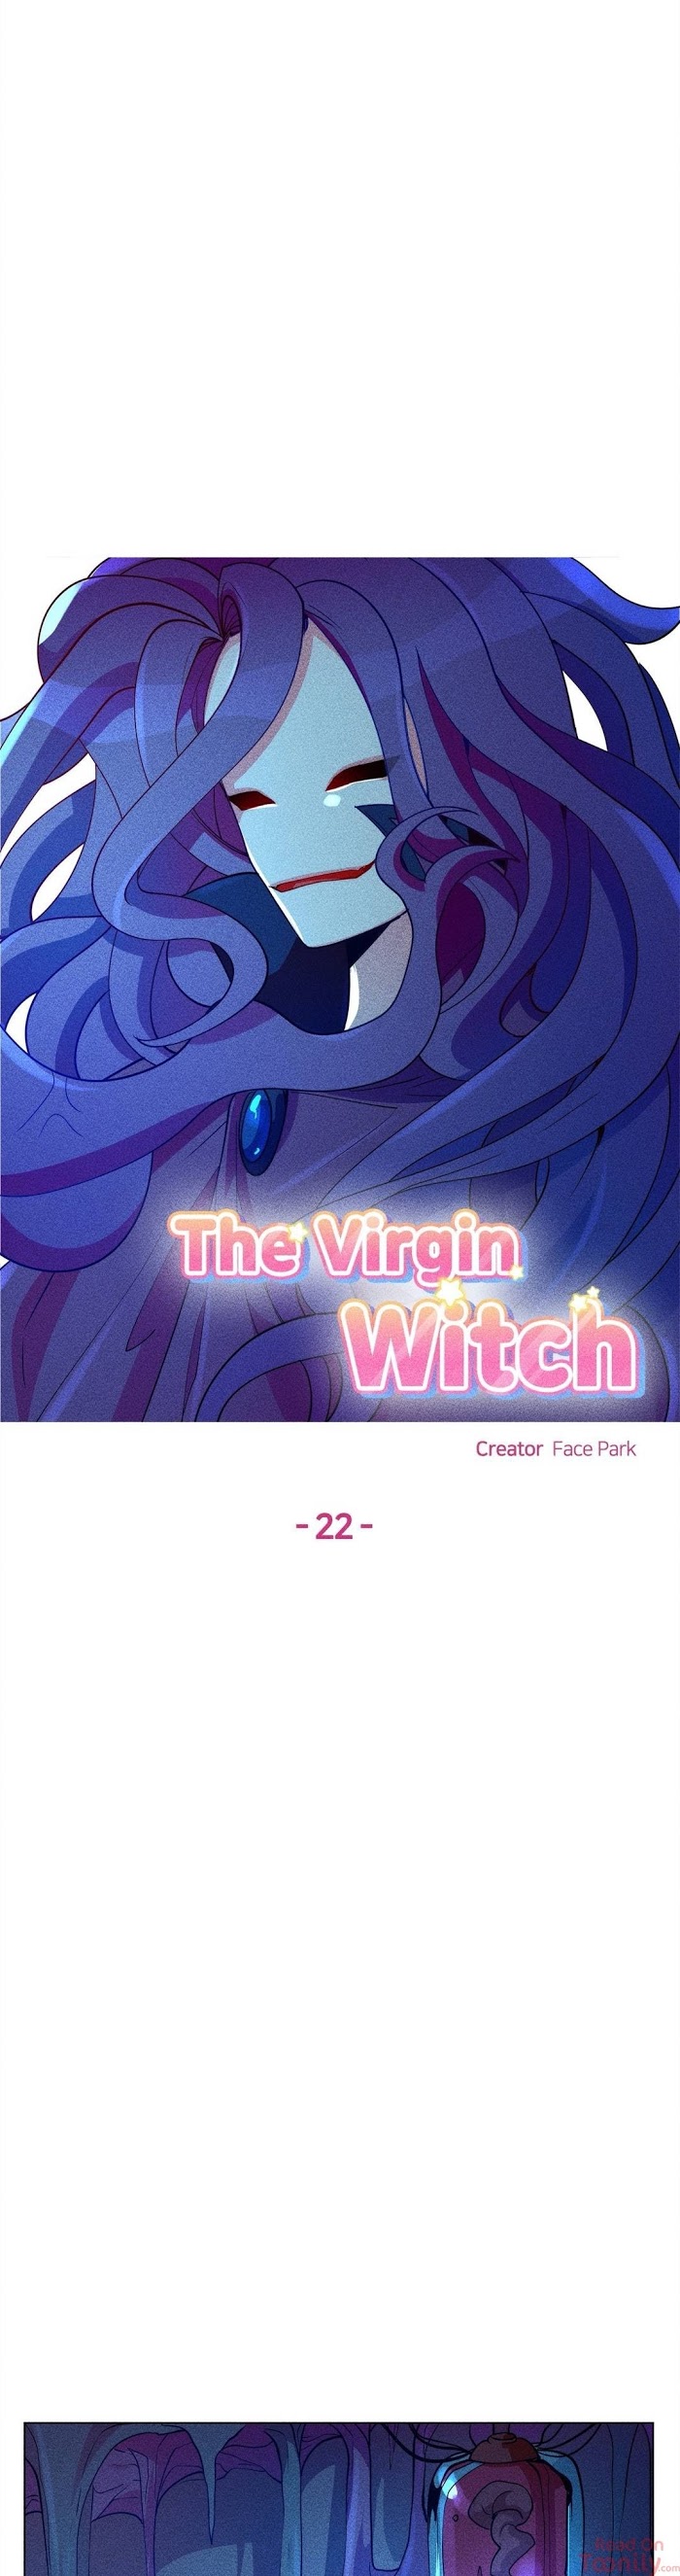 The Virgin Witch - Page 2